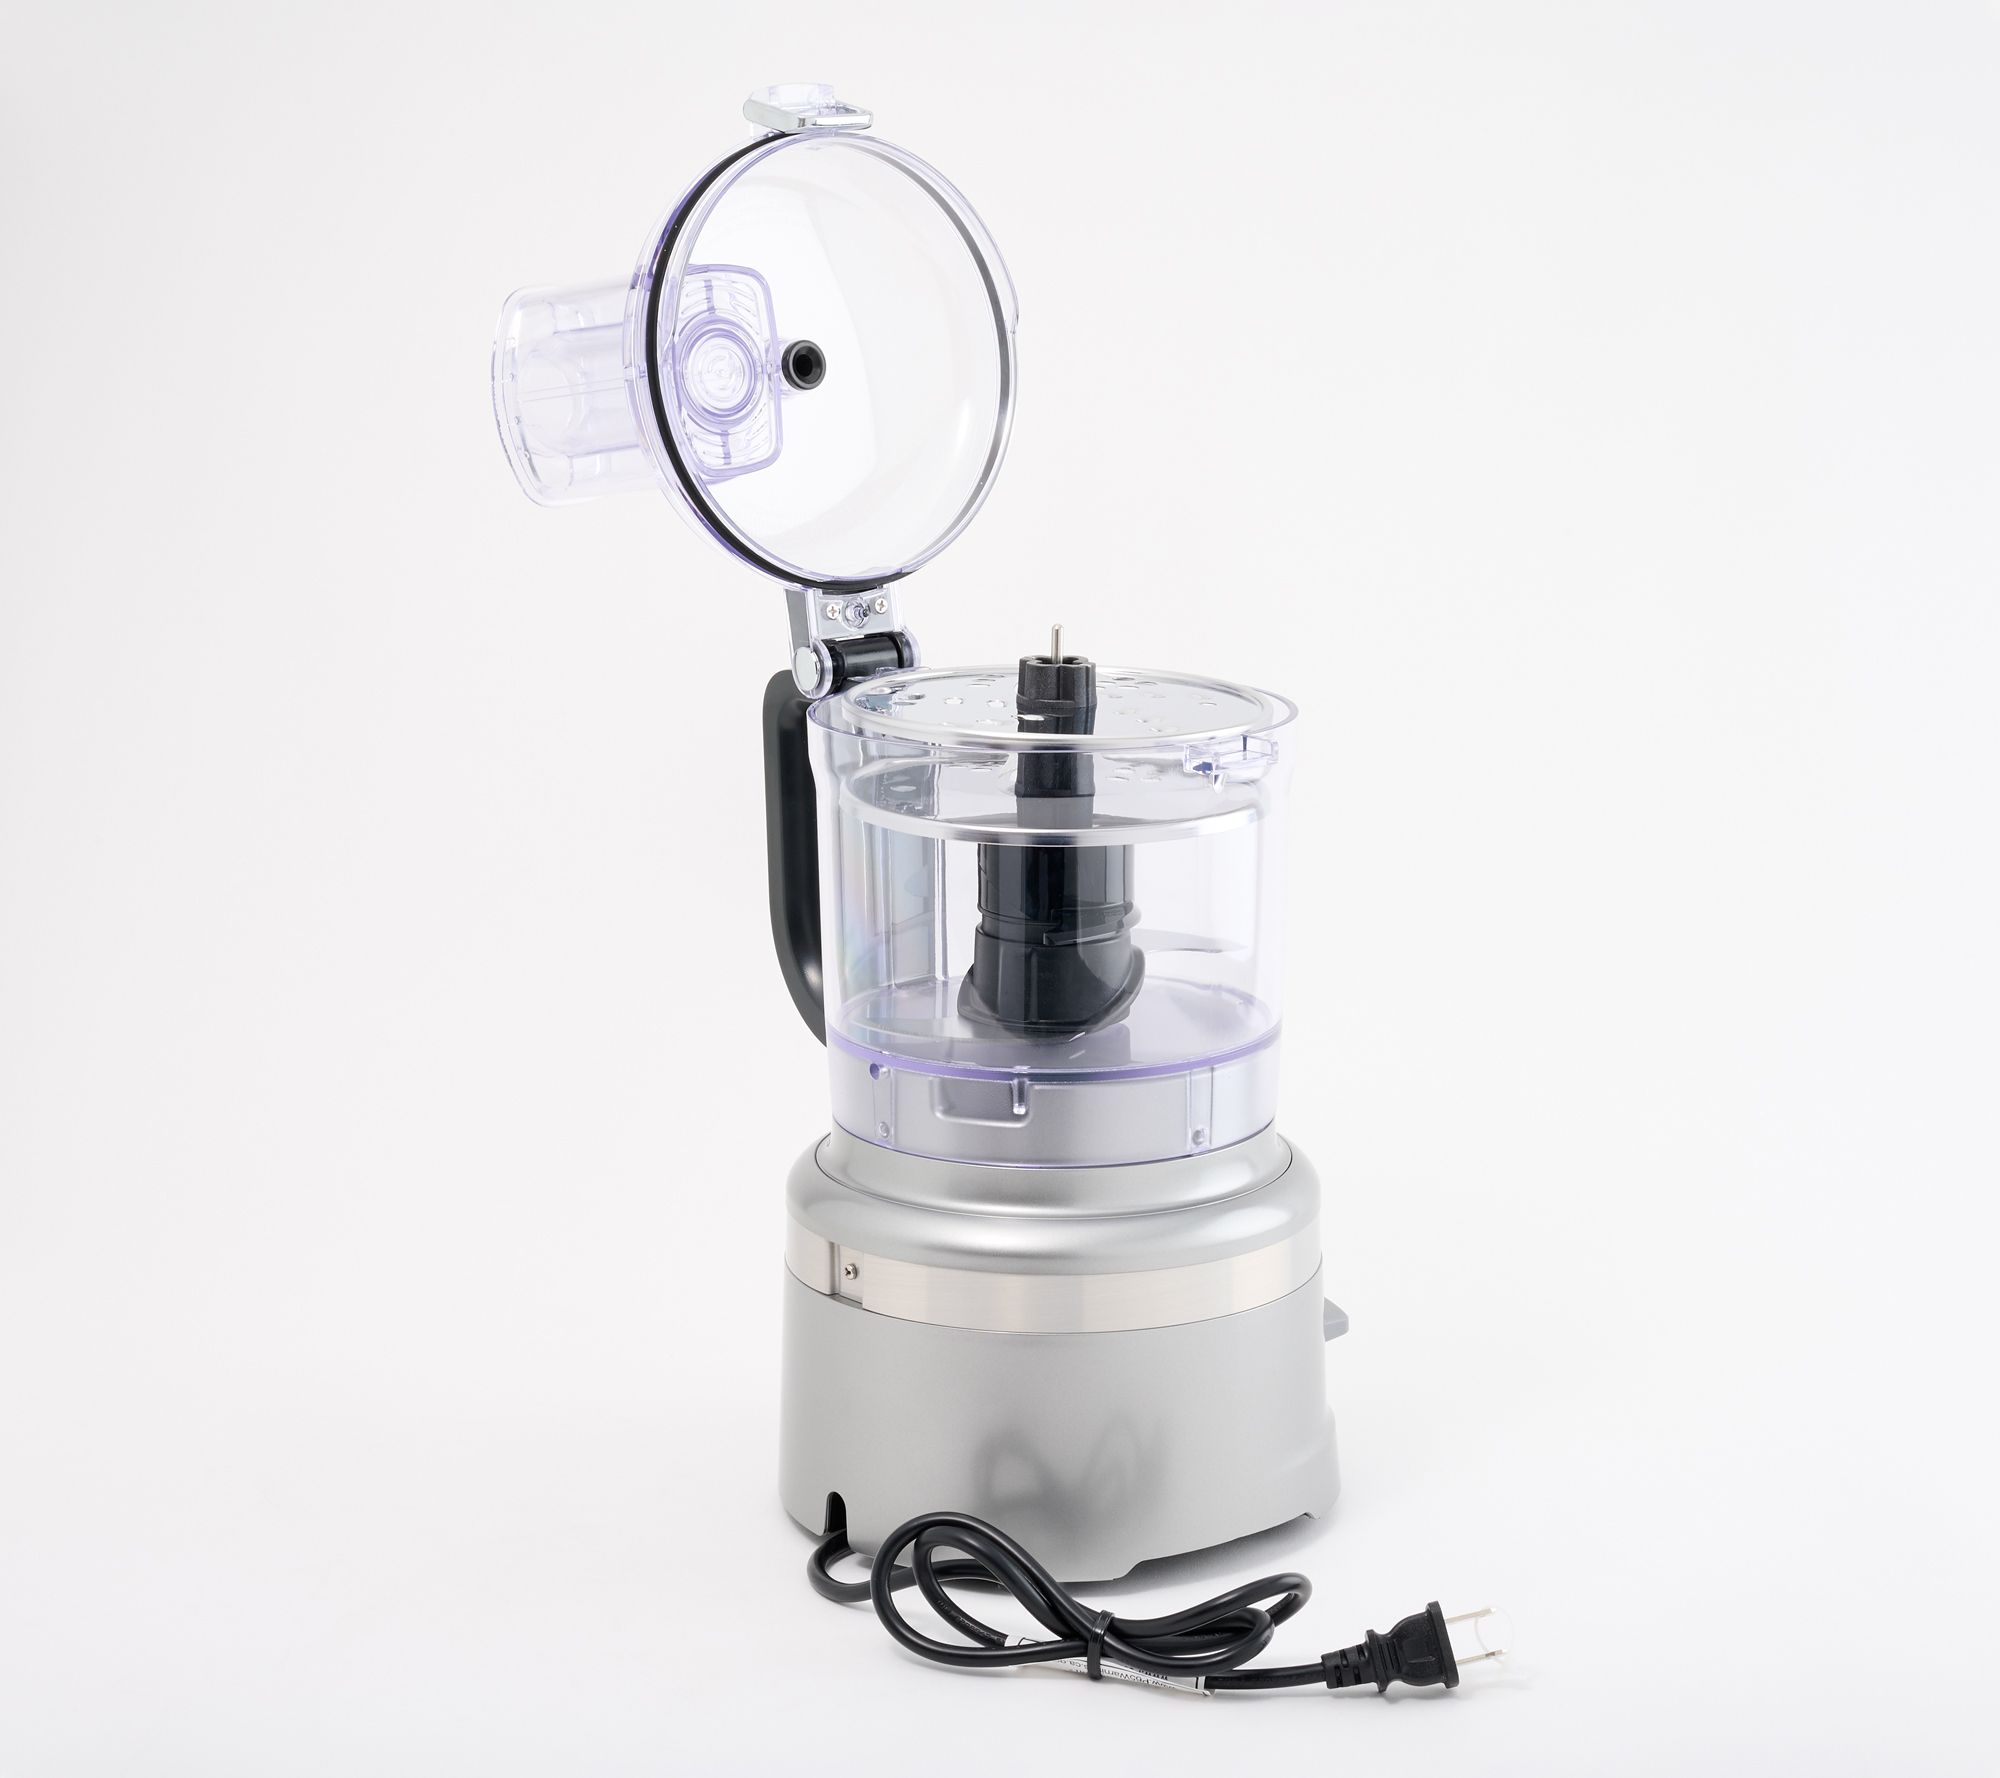 The 7 Cup Food Processor, Working smarter, not harder. That's the mark of  a maker., By KitchenAid